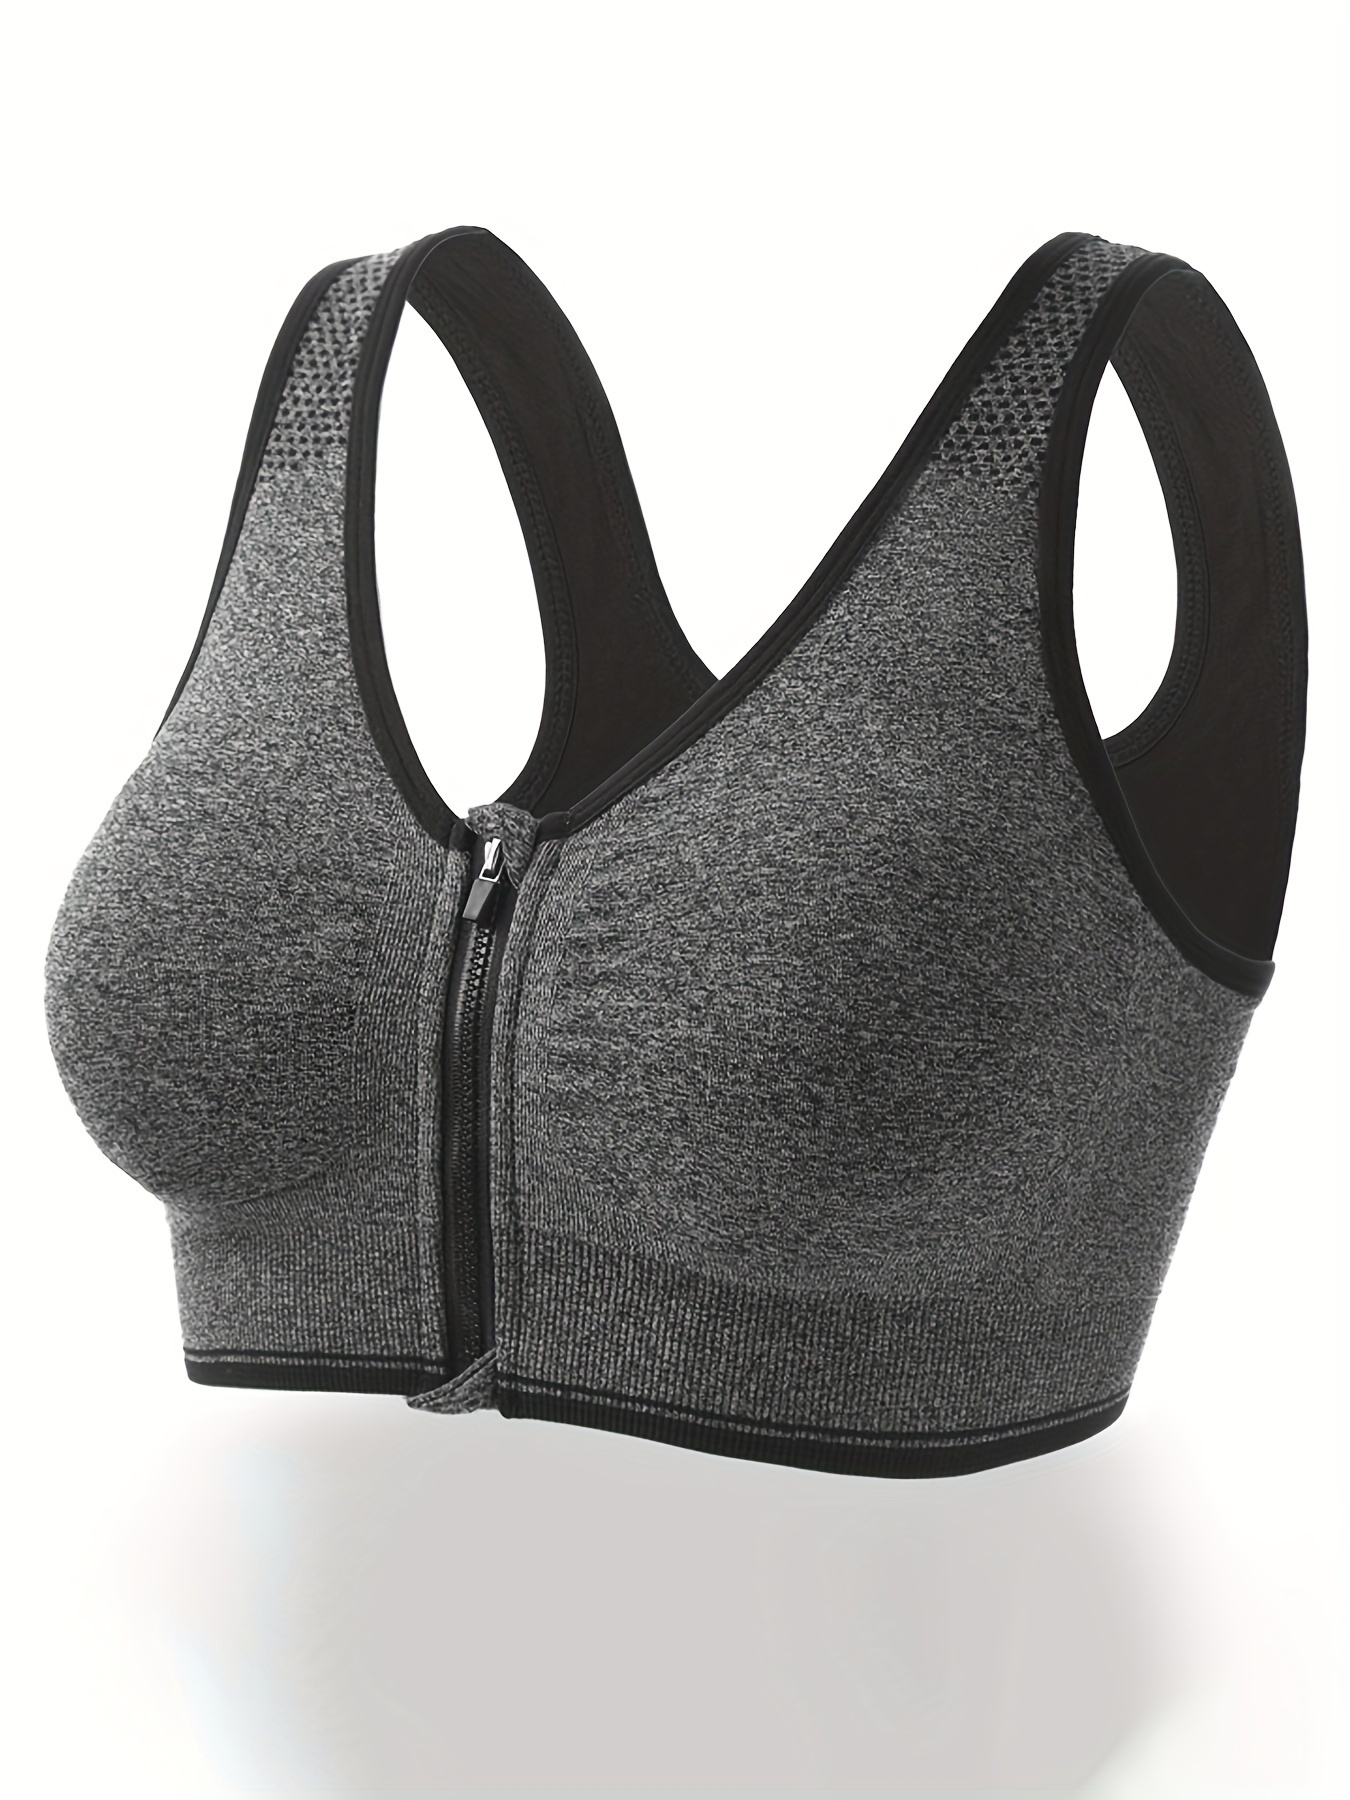 Large Size Fixed Sports Bras for Women, Shockproof Stretch Sports